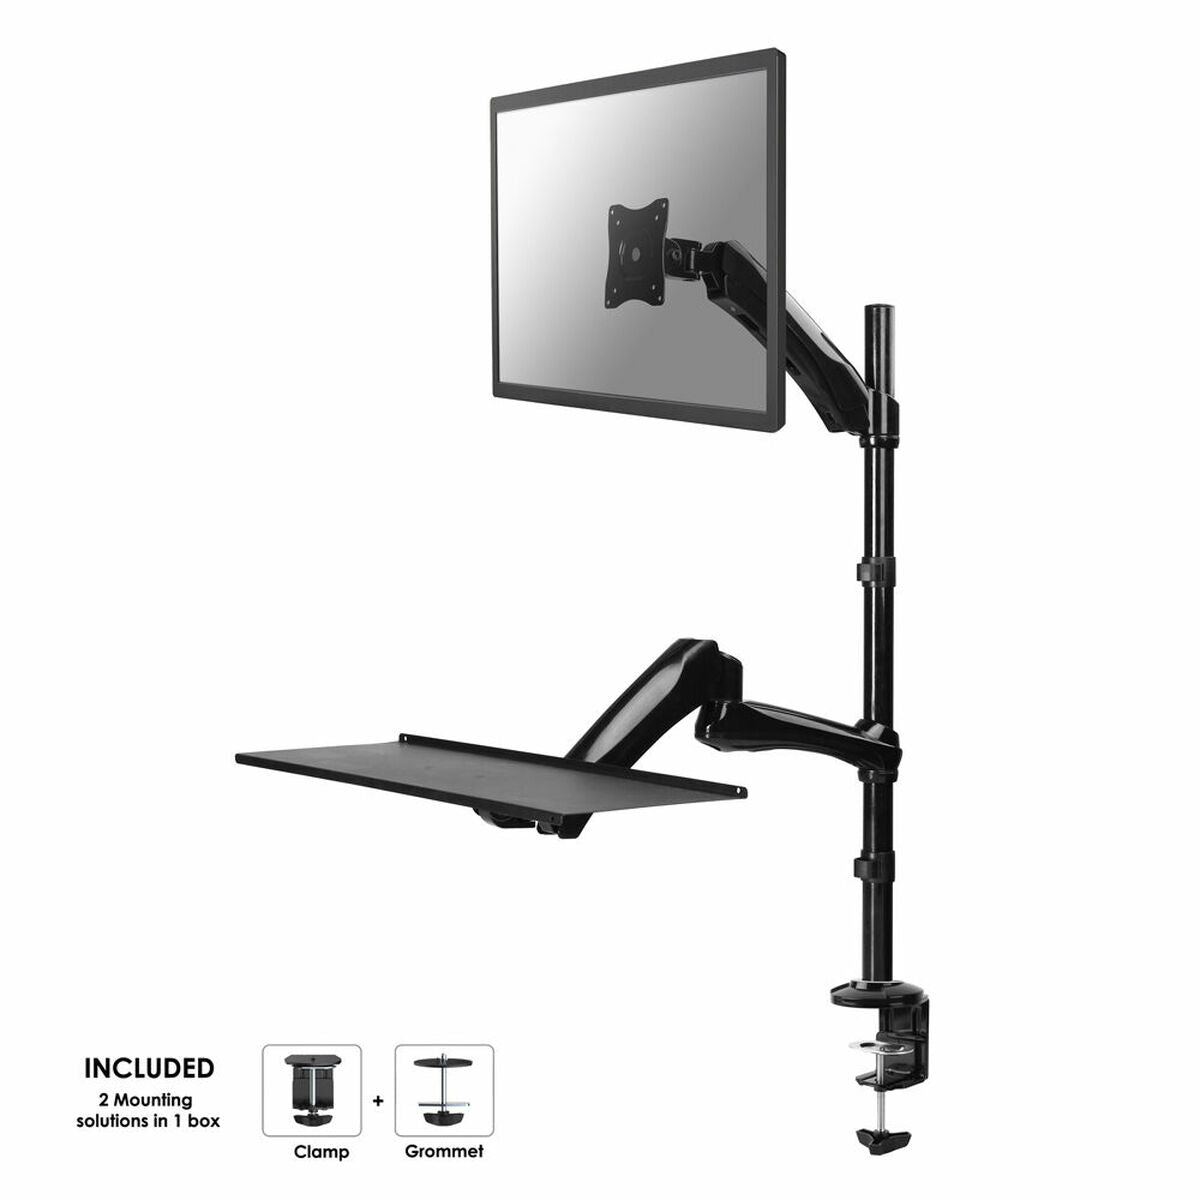 Screen Table Support Neomounts FPMA-D500KEYB, Neomounts, Computing, Accessories, screen-table-support-neomounts-fpma-d500keyb, Brand_Neomounts, category-reference-2609, category-reference-2803, category-reference-2828, category-reference-t-19685, category-reference-t-19908, category-reference-t-21349, Condition_NEW, furniture, networks/wiring, organisation, Price_200 - 300, Teleworking, RiotNook